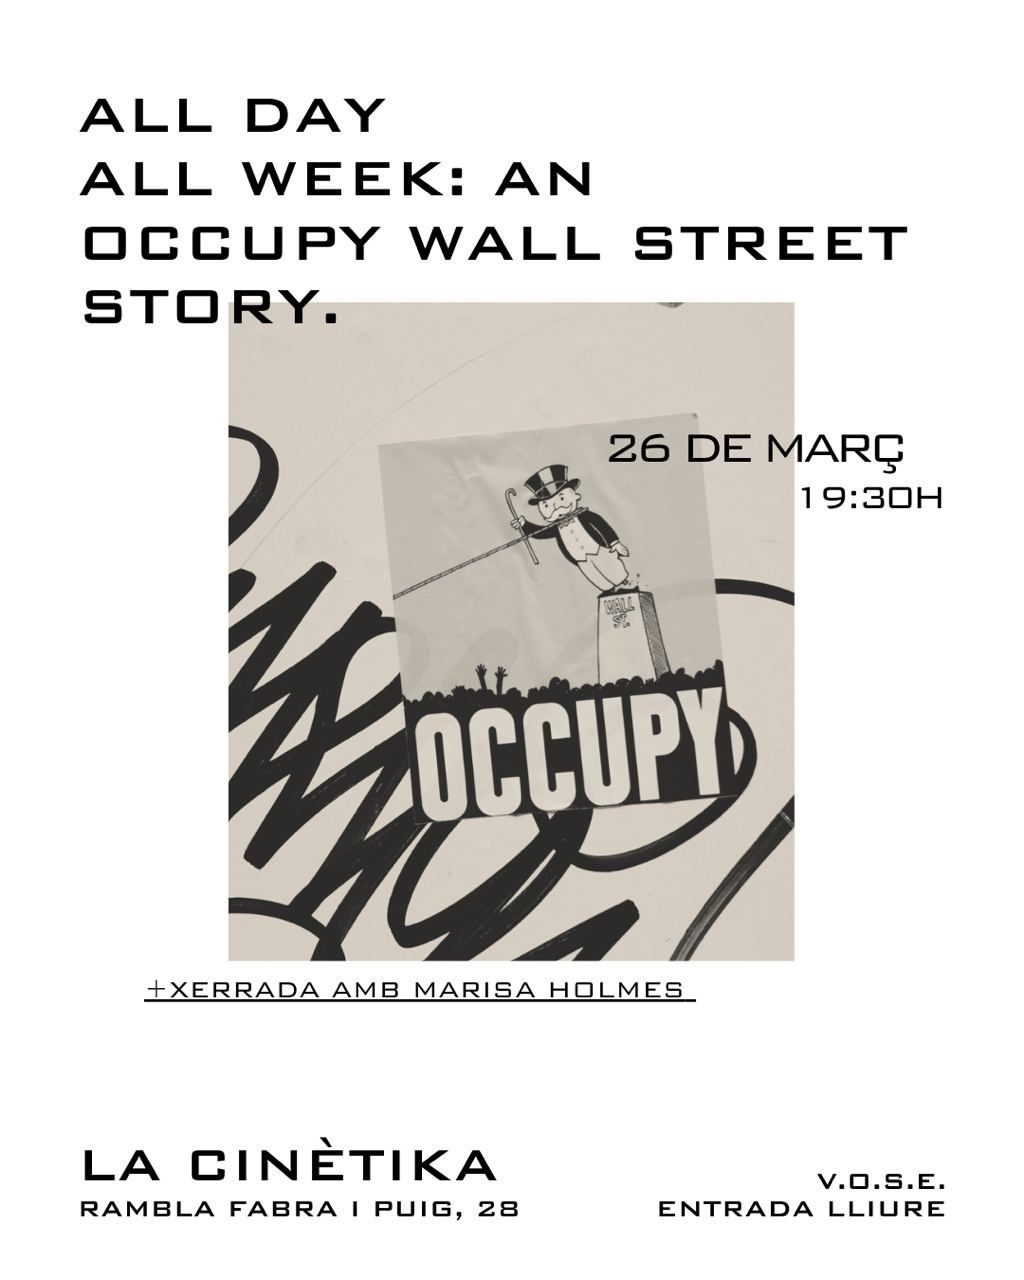 ALL DAY ALL WEEK: AN OCCUPY WALL STREET STORY